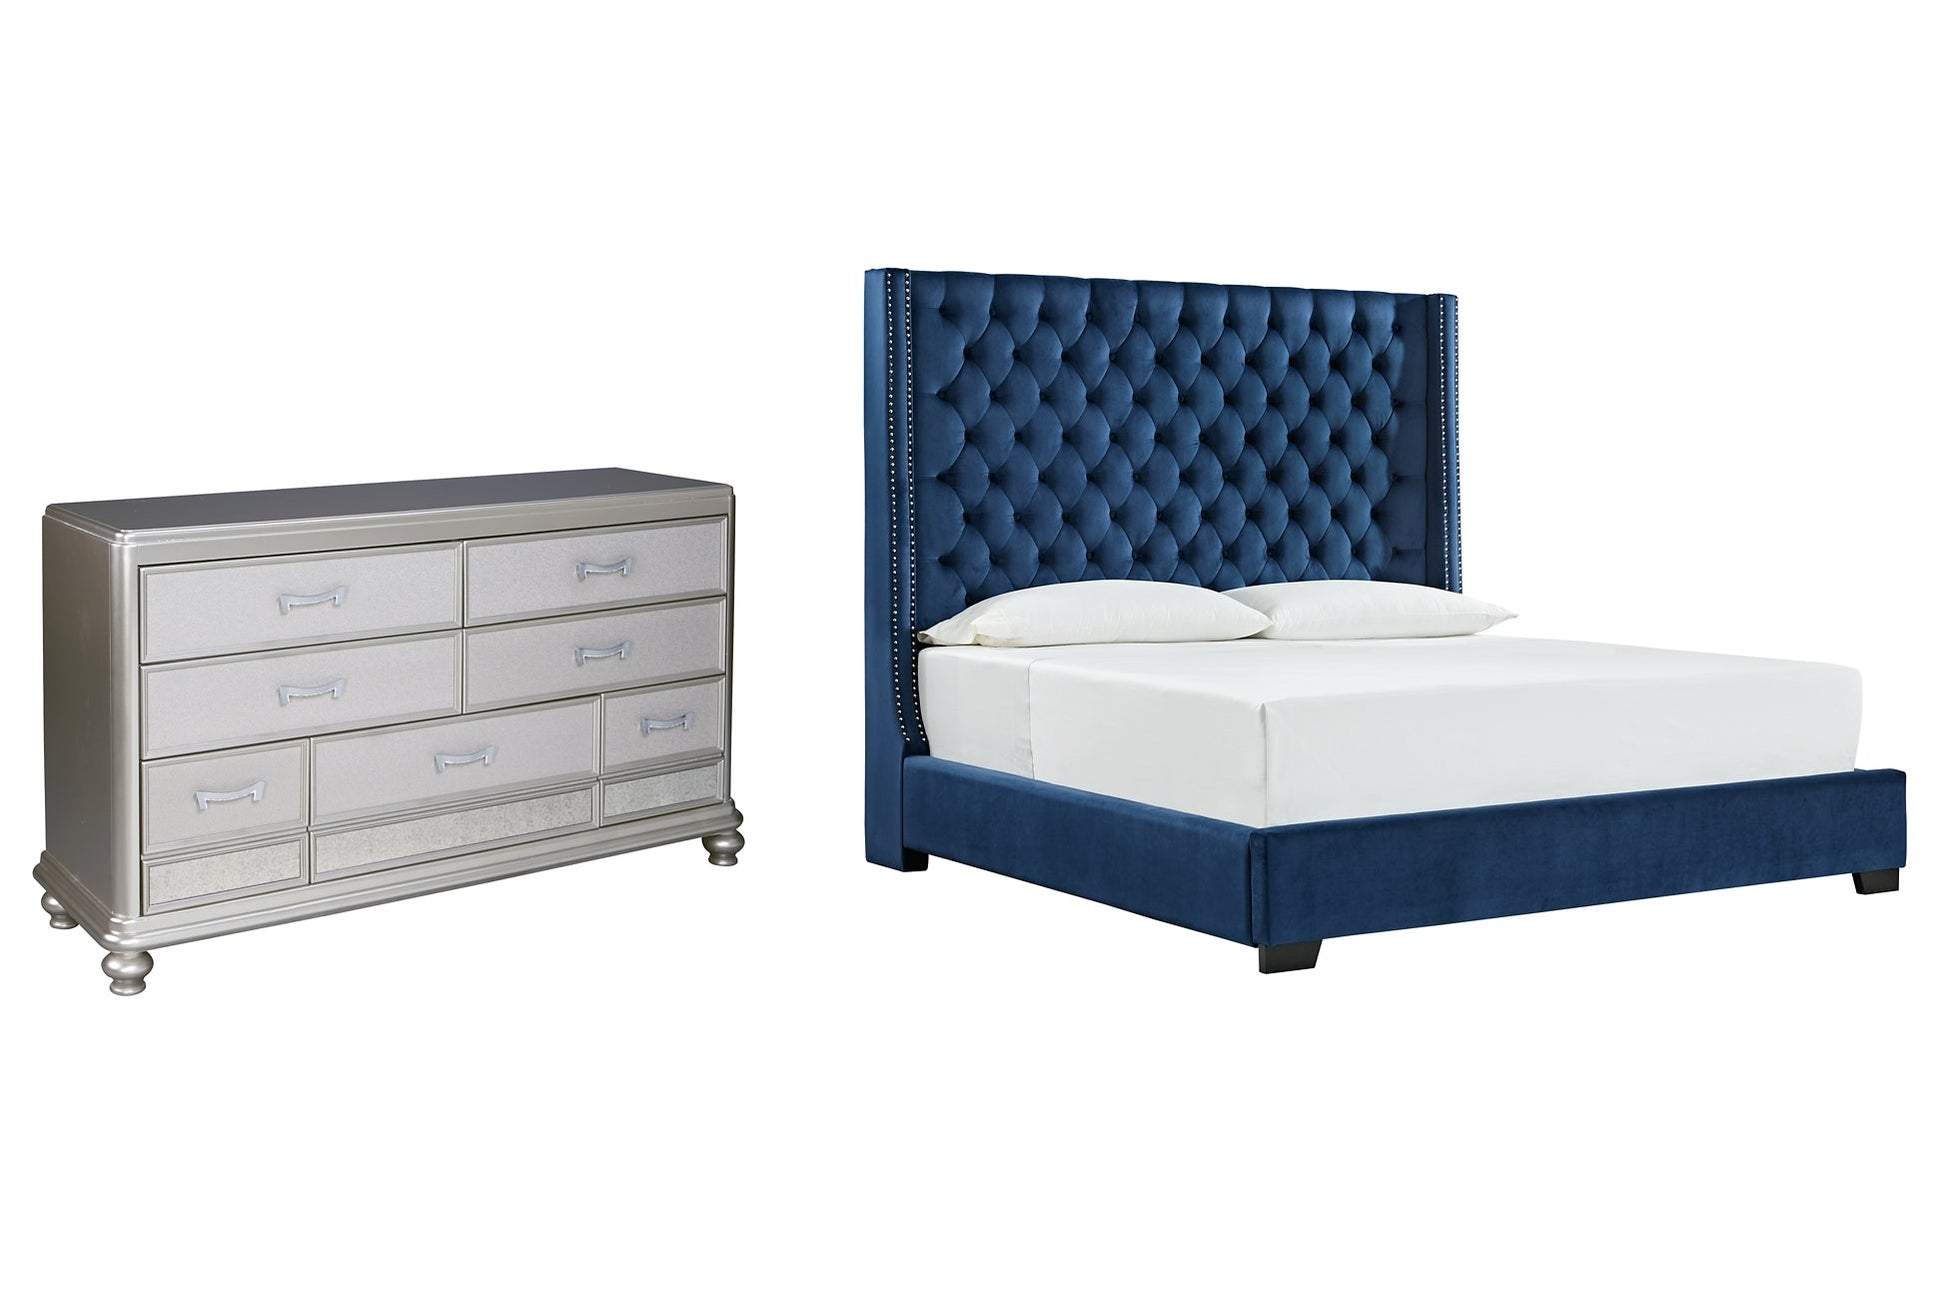 Coralayne California King Upholstered Bed with Dresser at Walker Mattress and Furniture Locations in Cedar Park and Belton TX.